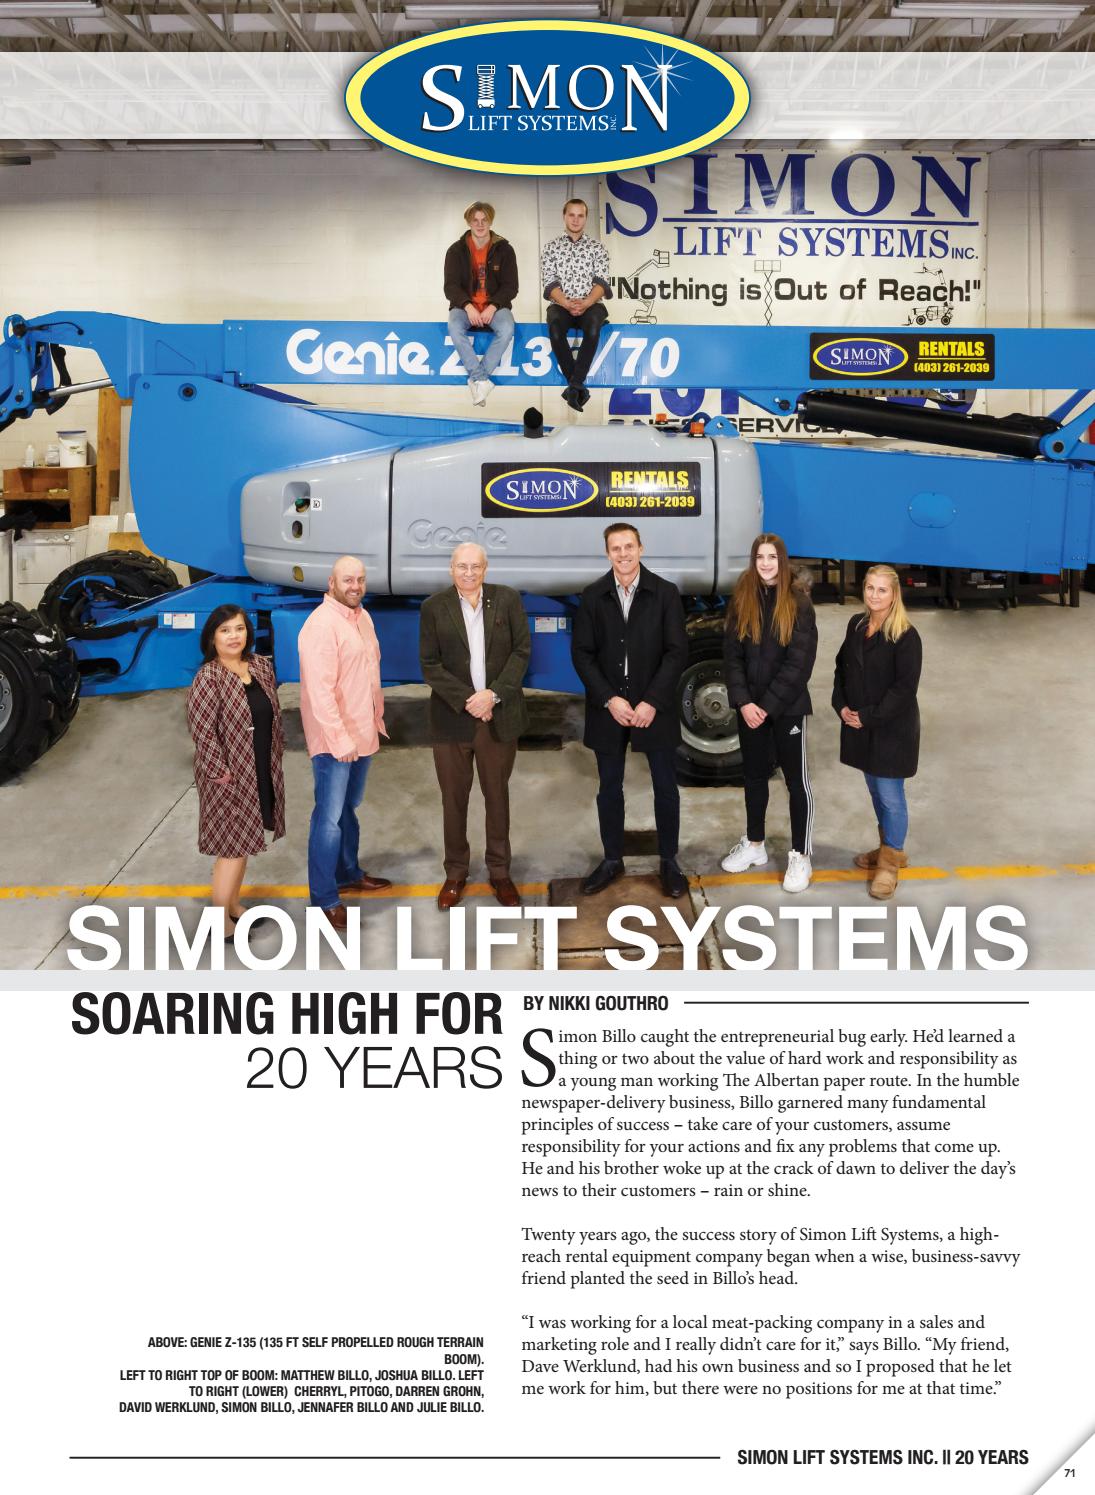 Business in Calgary Magazine - Business Profile for SimonLift